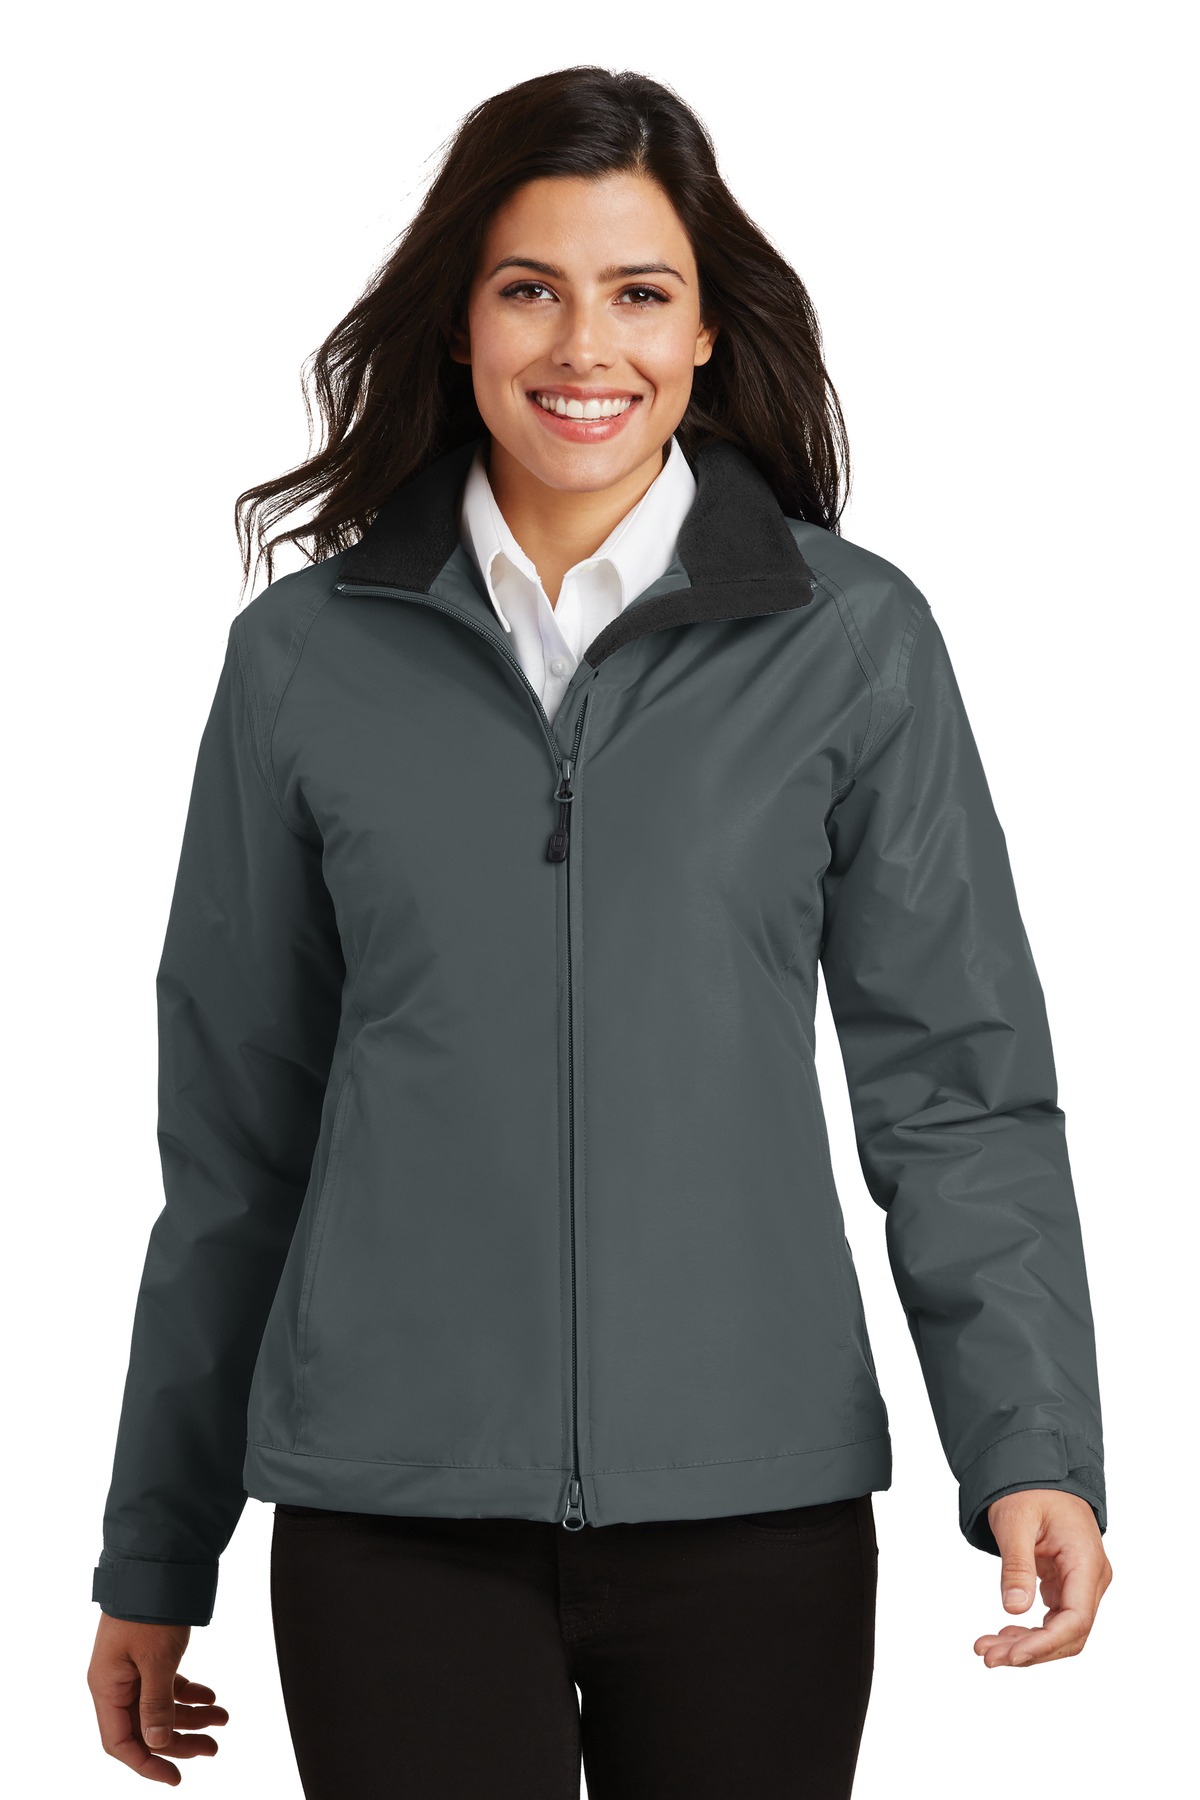 Port Authority Ladies Outerwear for Hospitality ® Ladies Challenger Jacket.-Port Authority